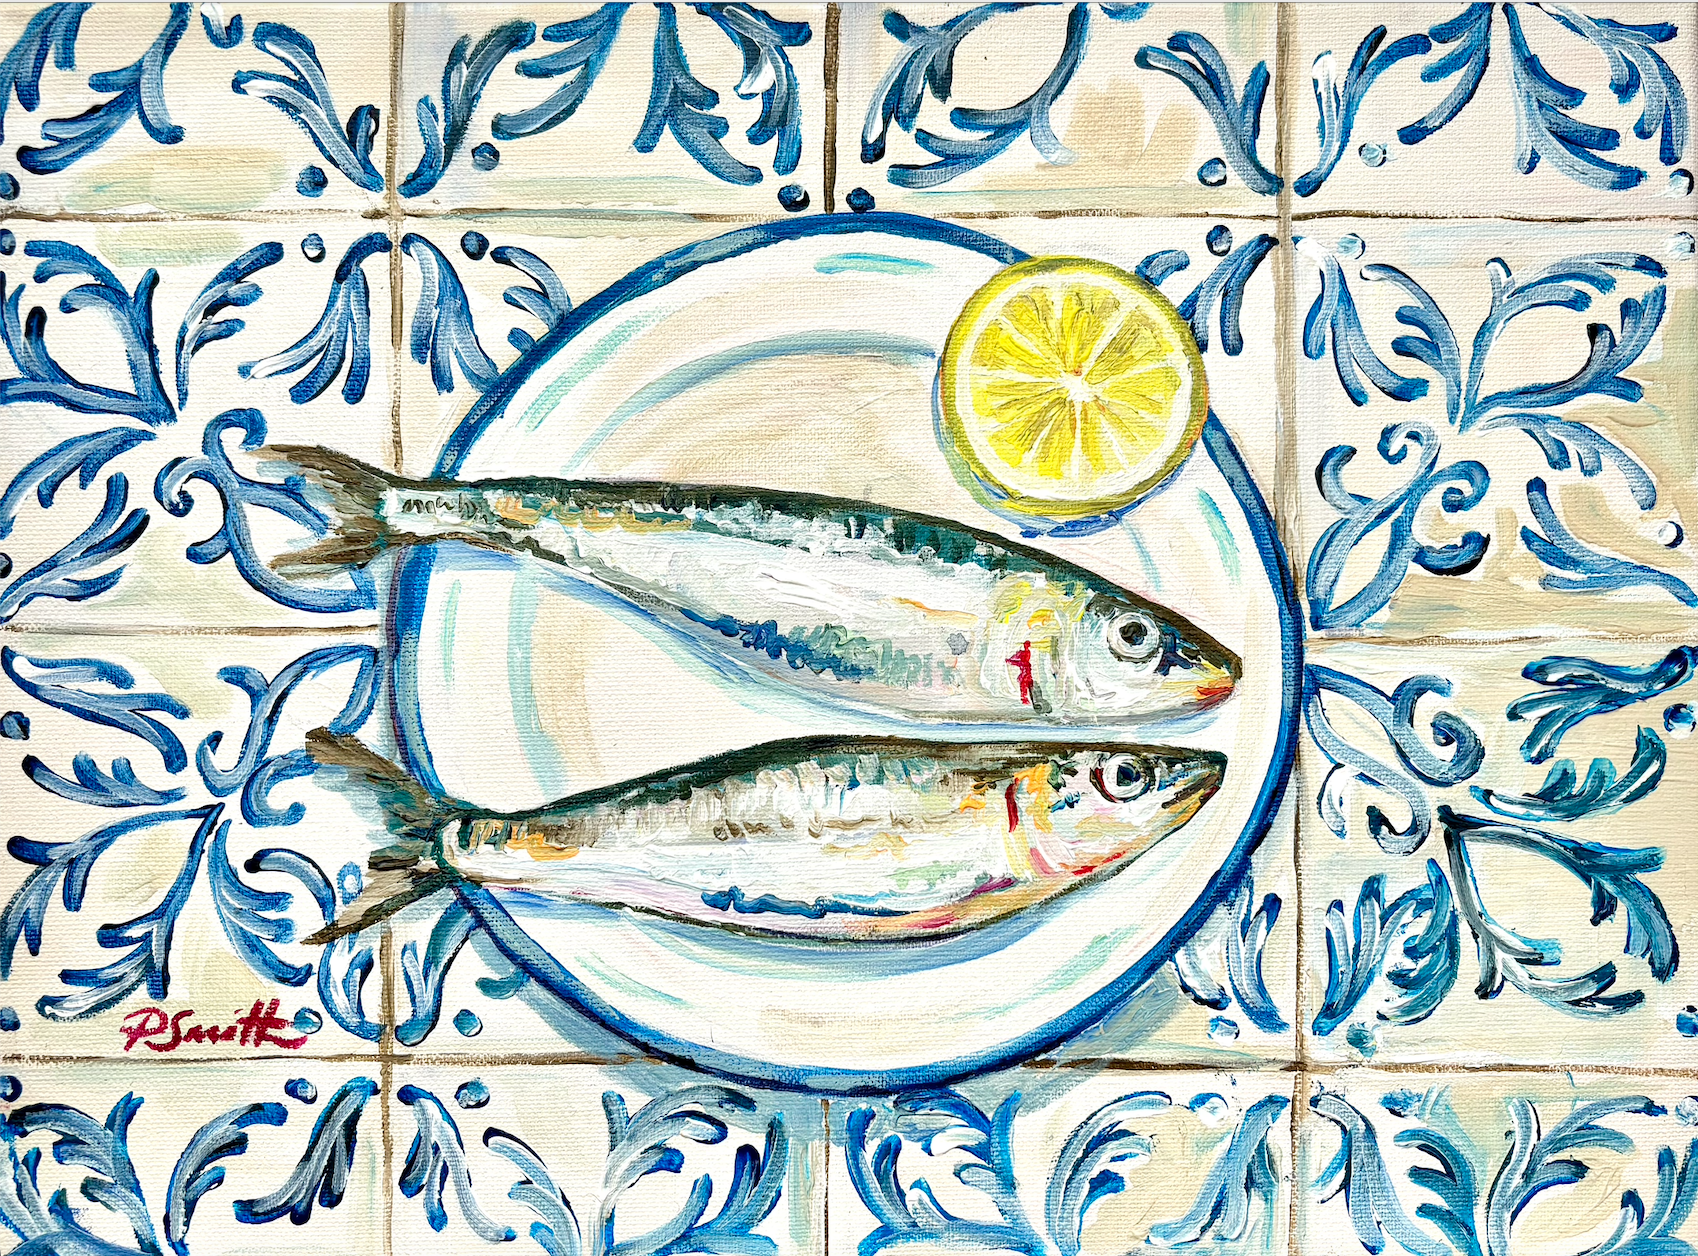 Two Sardines on Spanish Tiles by Pippa Smith